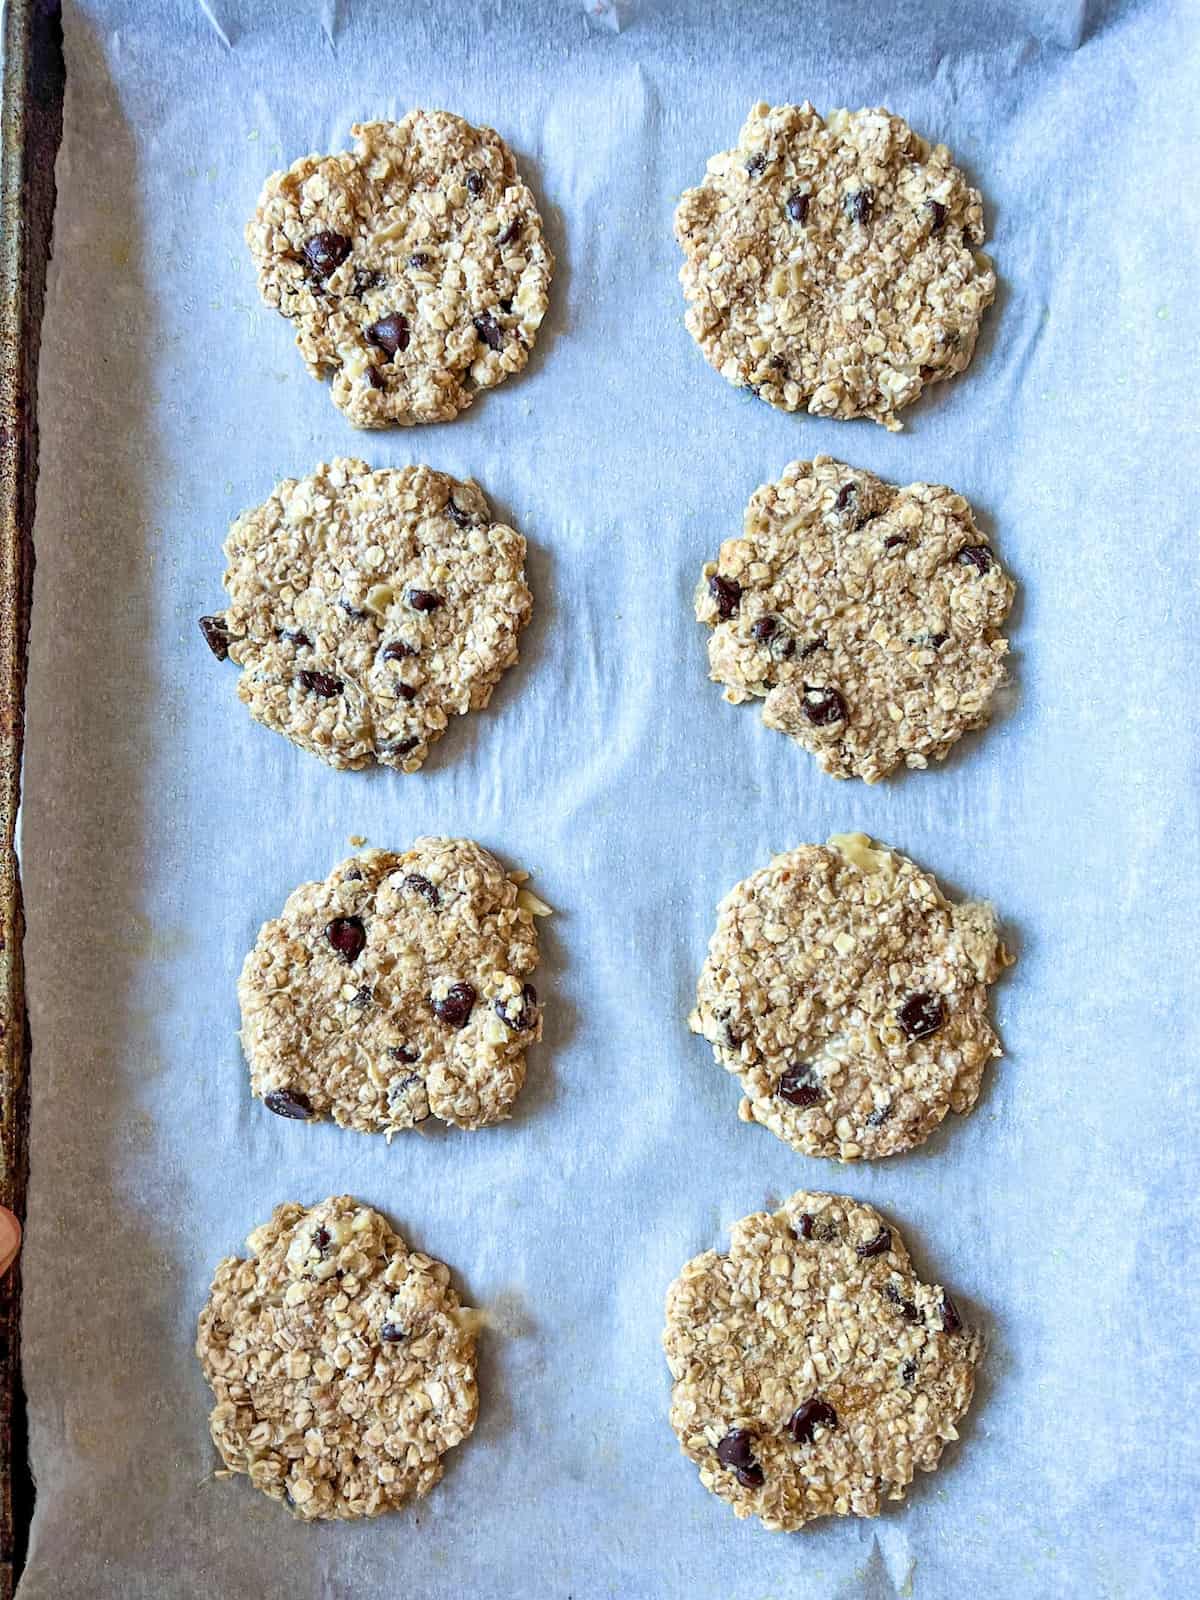 step 3 of 4 ingredient banana and oatmeal cookies, shape cookie into balls and place them on a prepared baking sheet